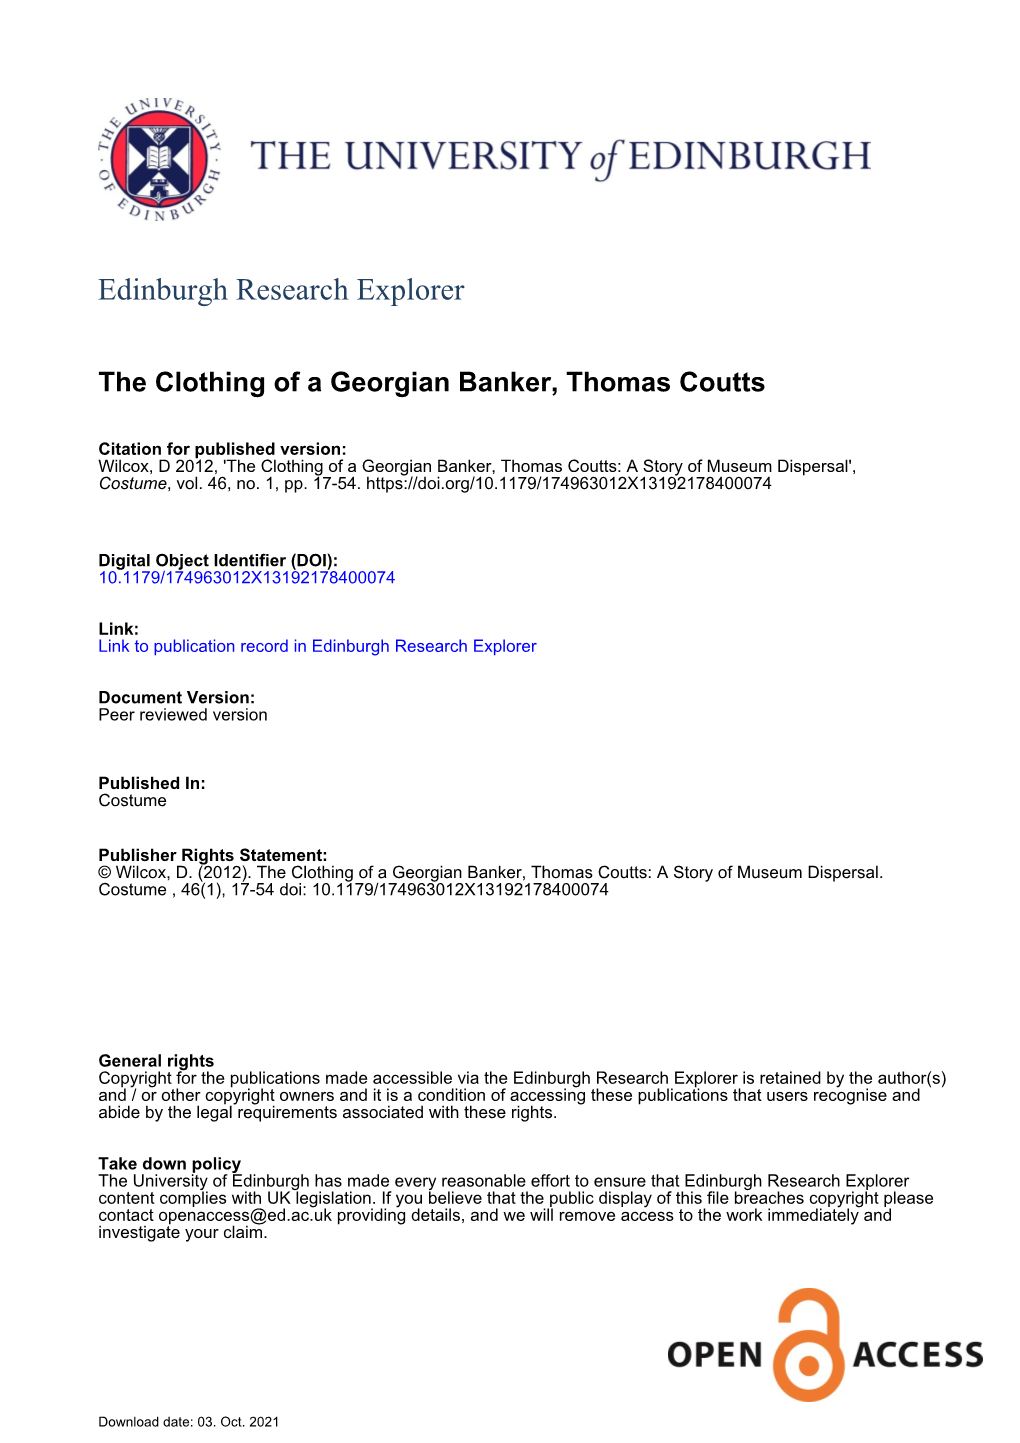 The Clothing of a Georgian Banker, Thomas Coutts